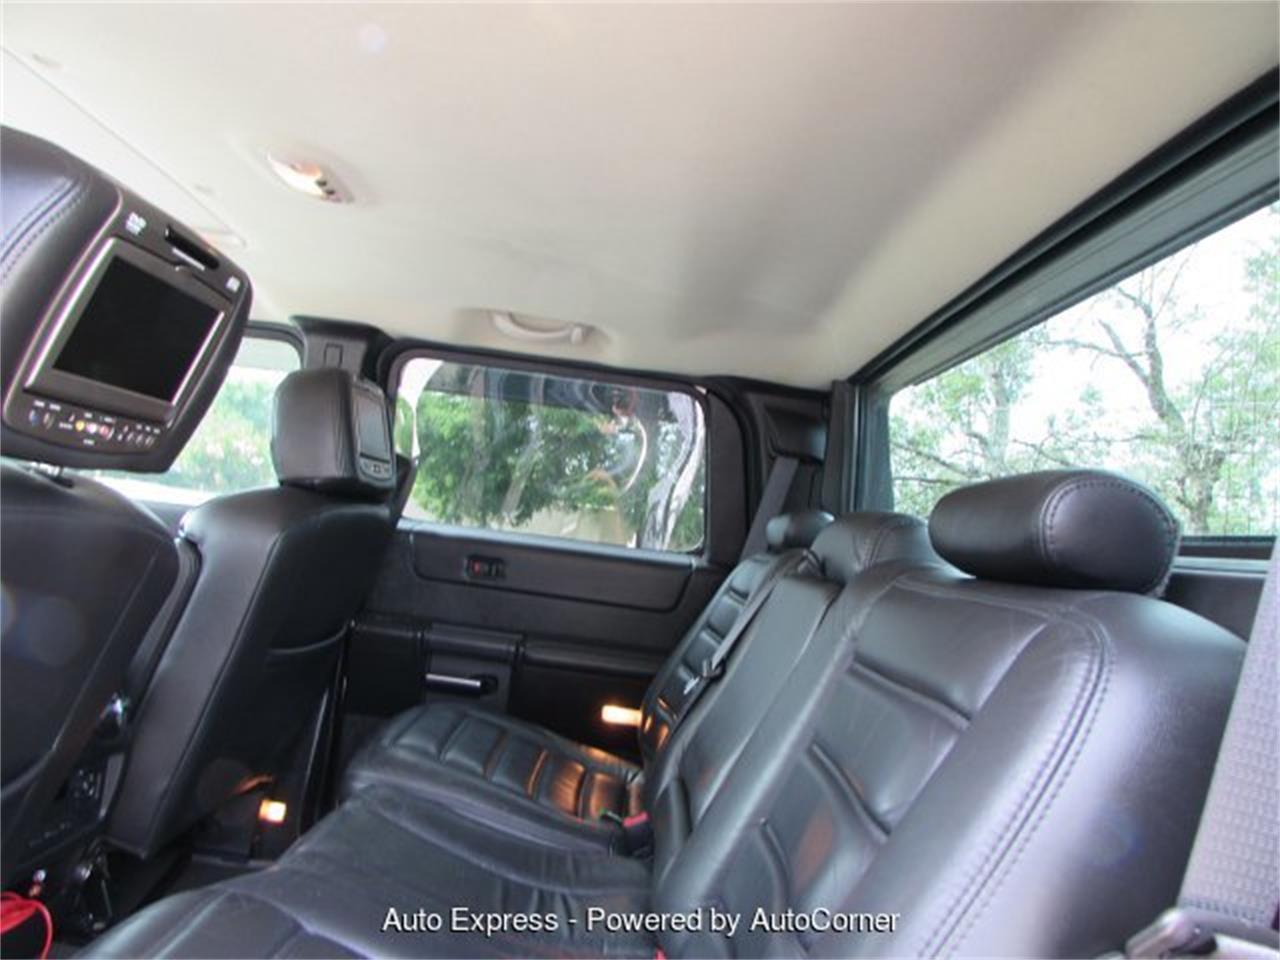 2006 Hummer H2 for sale in Orlando, FL – photo 15